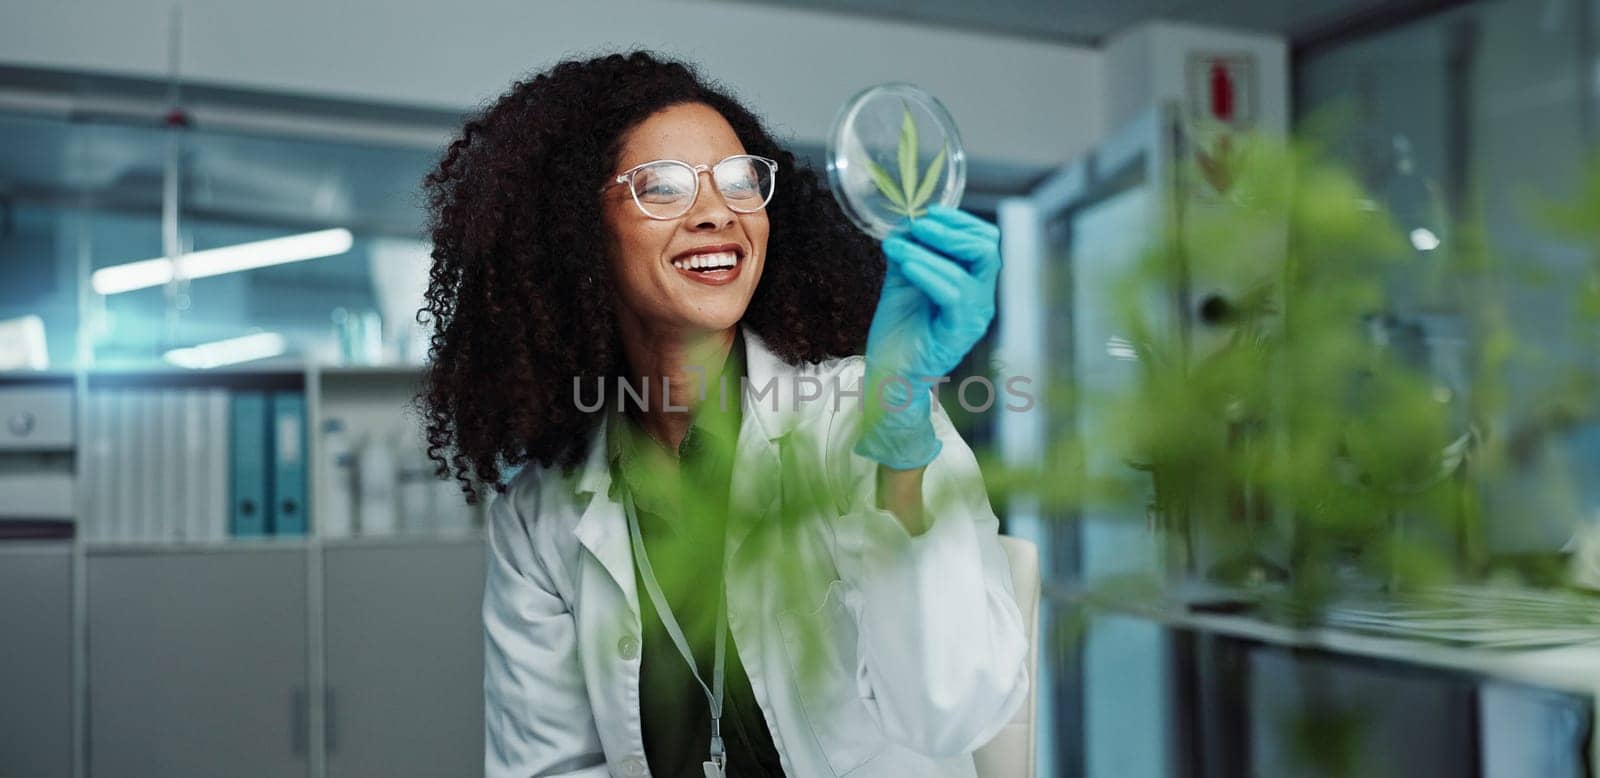 Scientist, cannabis and Petri dish in laboratory for research, development or medical experiment. Teamwork, analysis and focus on investigation for knowledge, testing and pharmaceutical innovation.